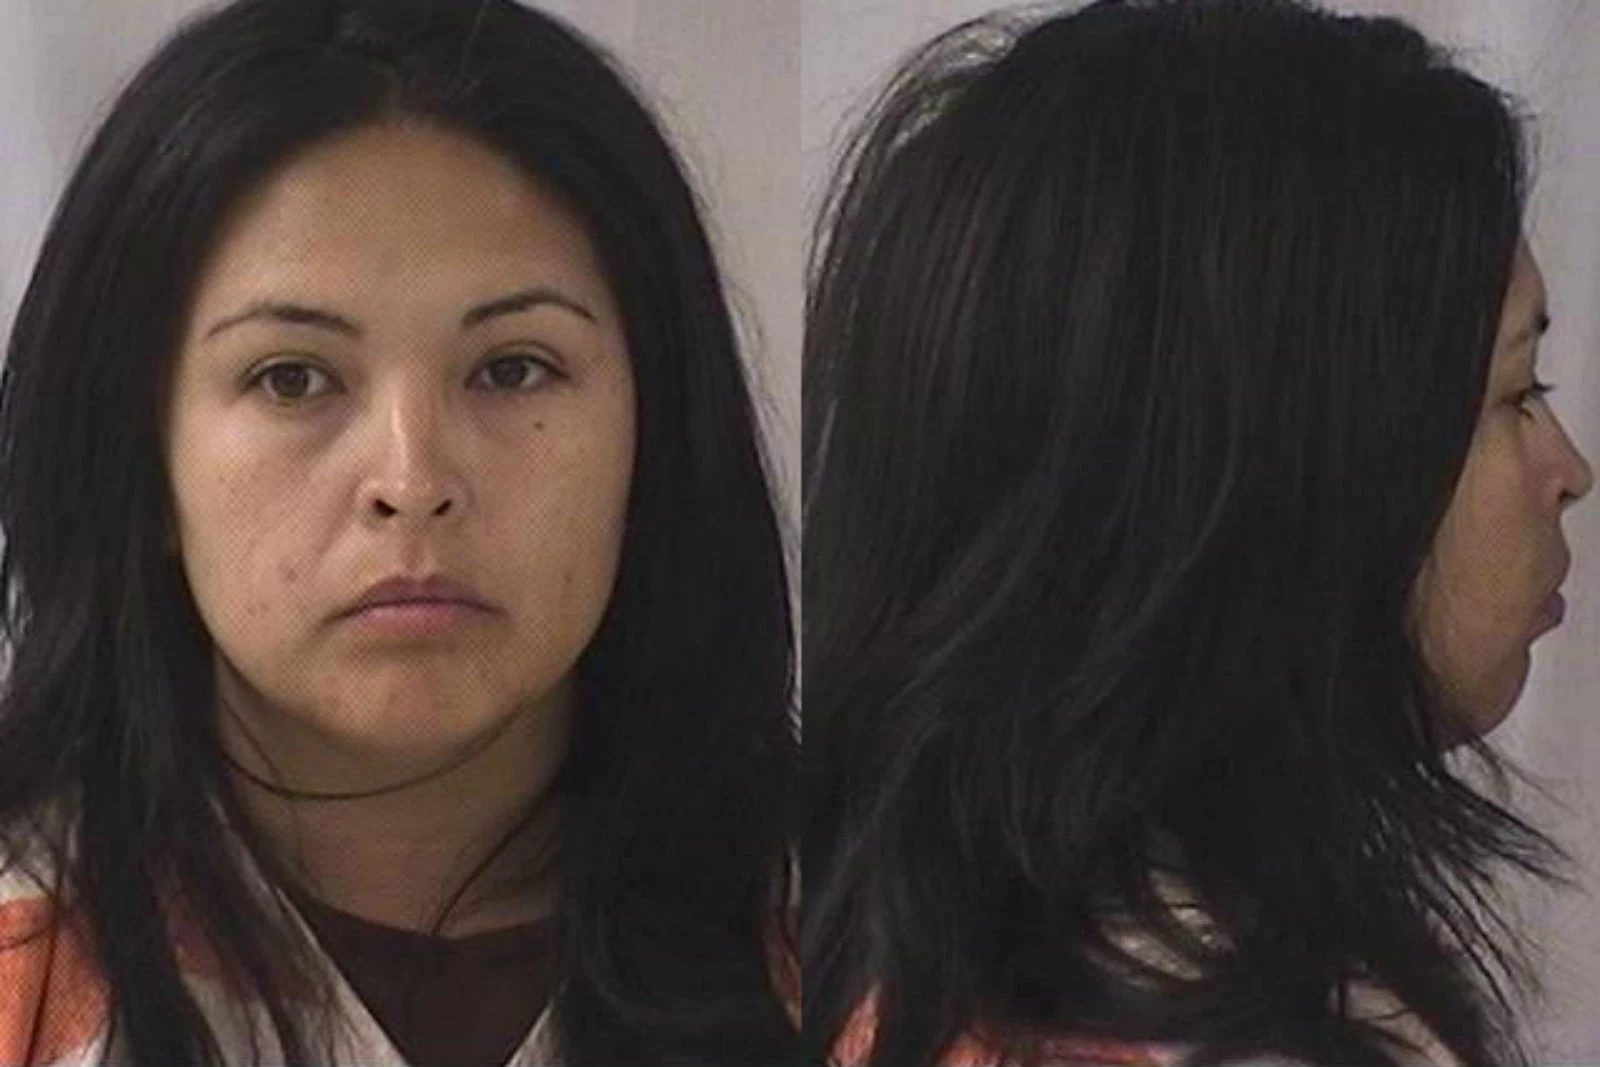 Cheyenne Woman Acquitted in Fiances Death